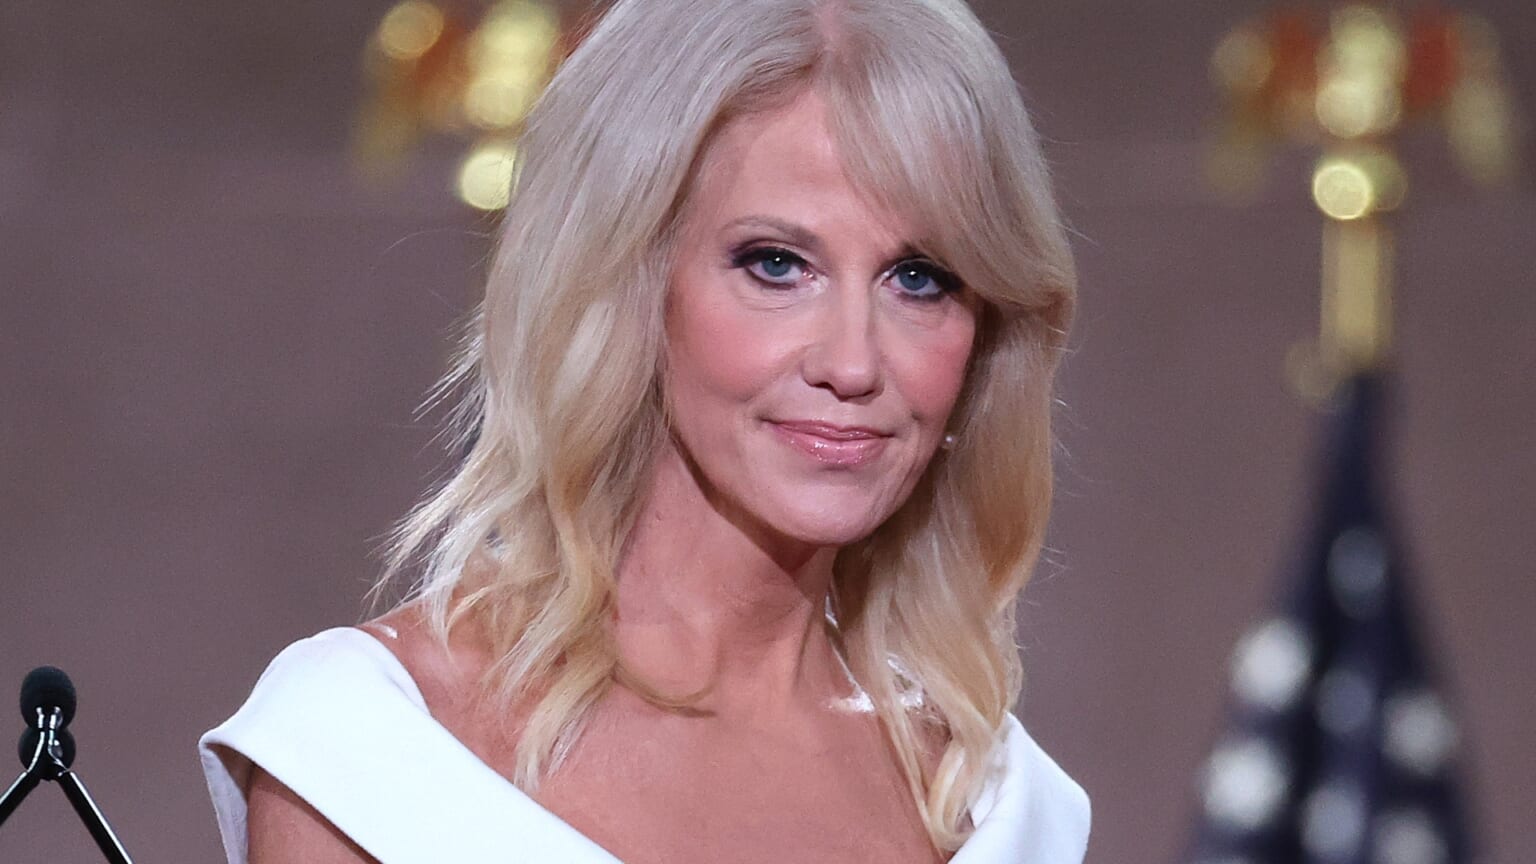 Kellyanne Conway’s daughter accuses her of abuse, shares shocking videos